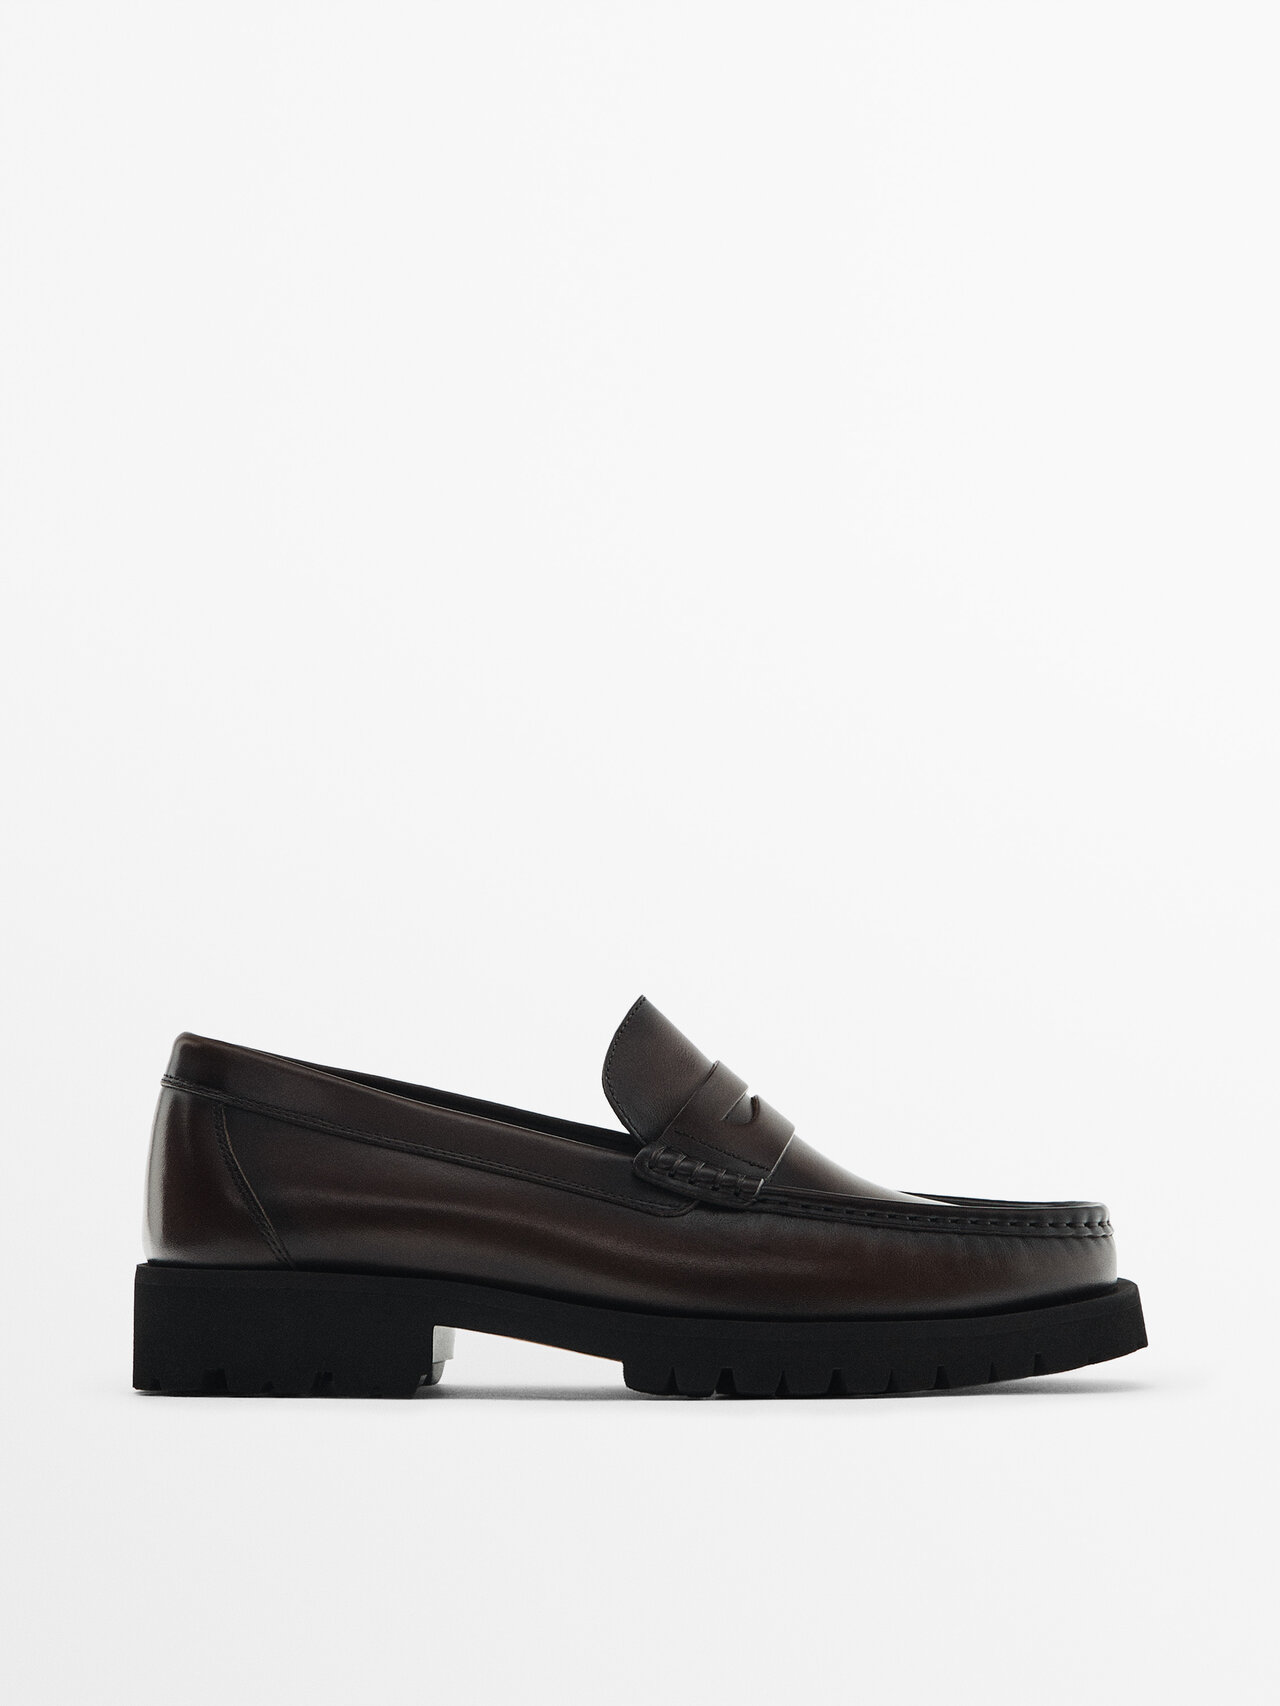 Massimo Dutti Brushed Nappa Leather Loafers - Studio In Brown